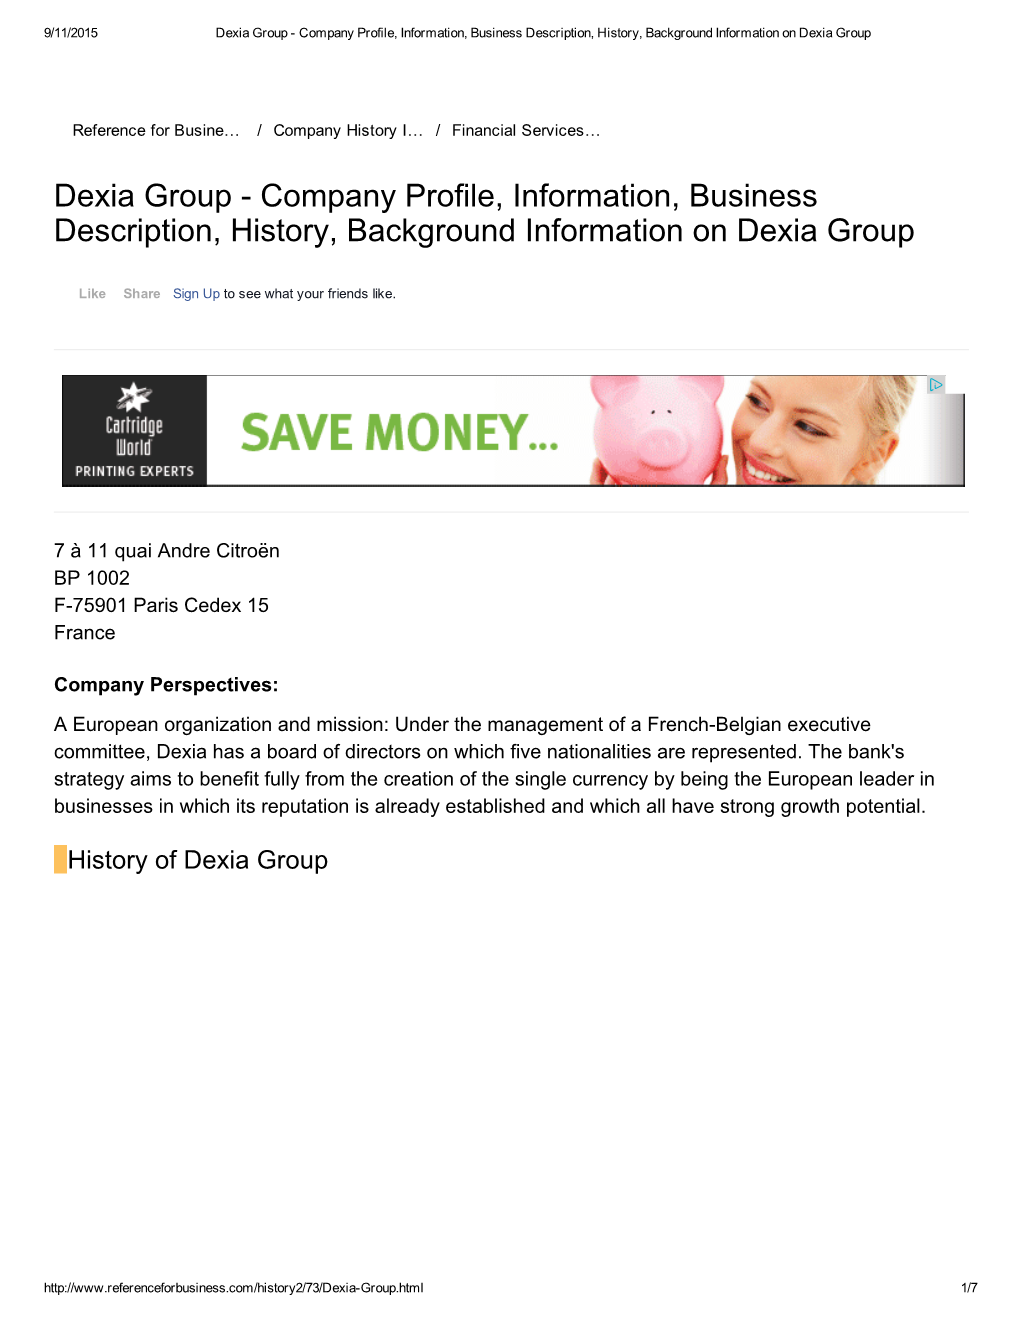 Dexia Group Company Profile, Information, Business Description, History, Background Information on Dexia Group